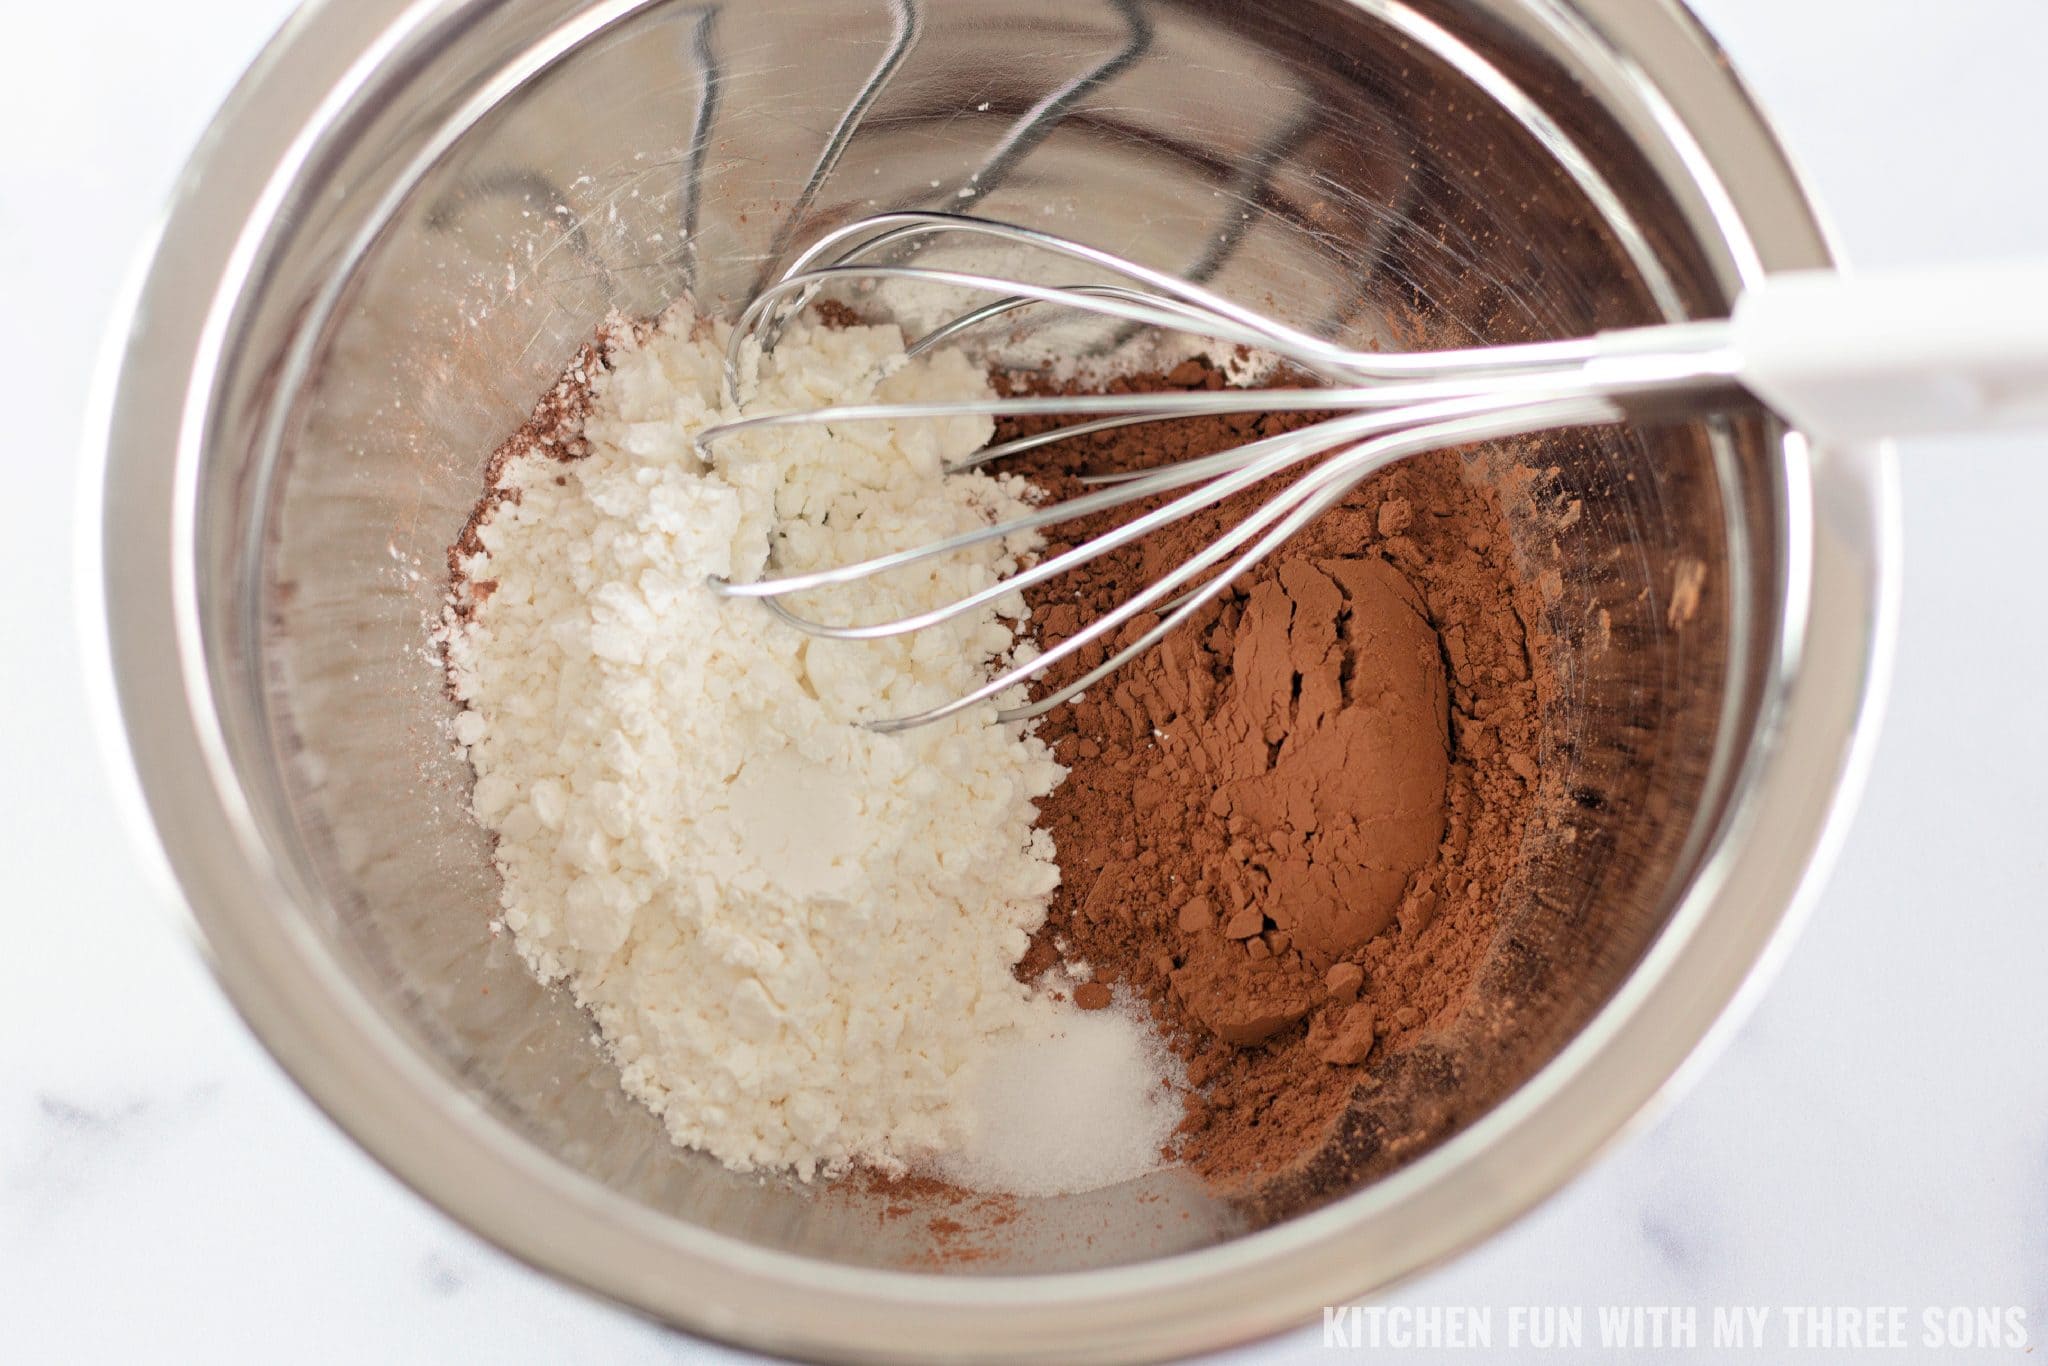 Dry brownie ingredients combined in a metal bowl with a whisk.